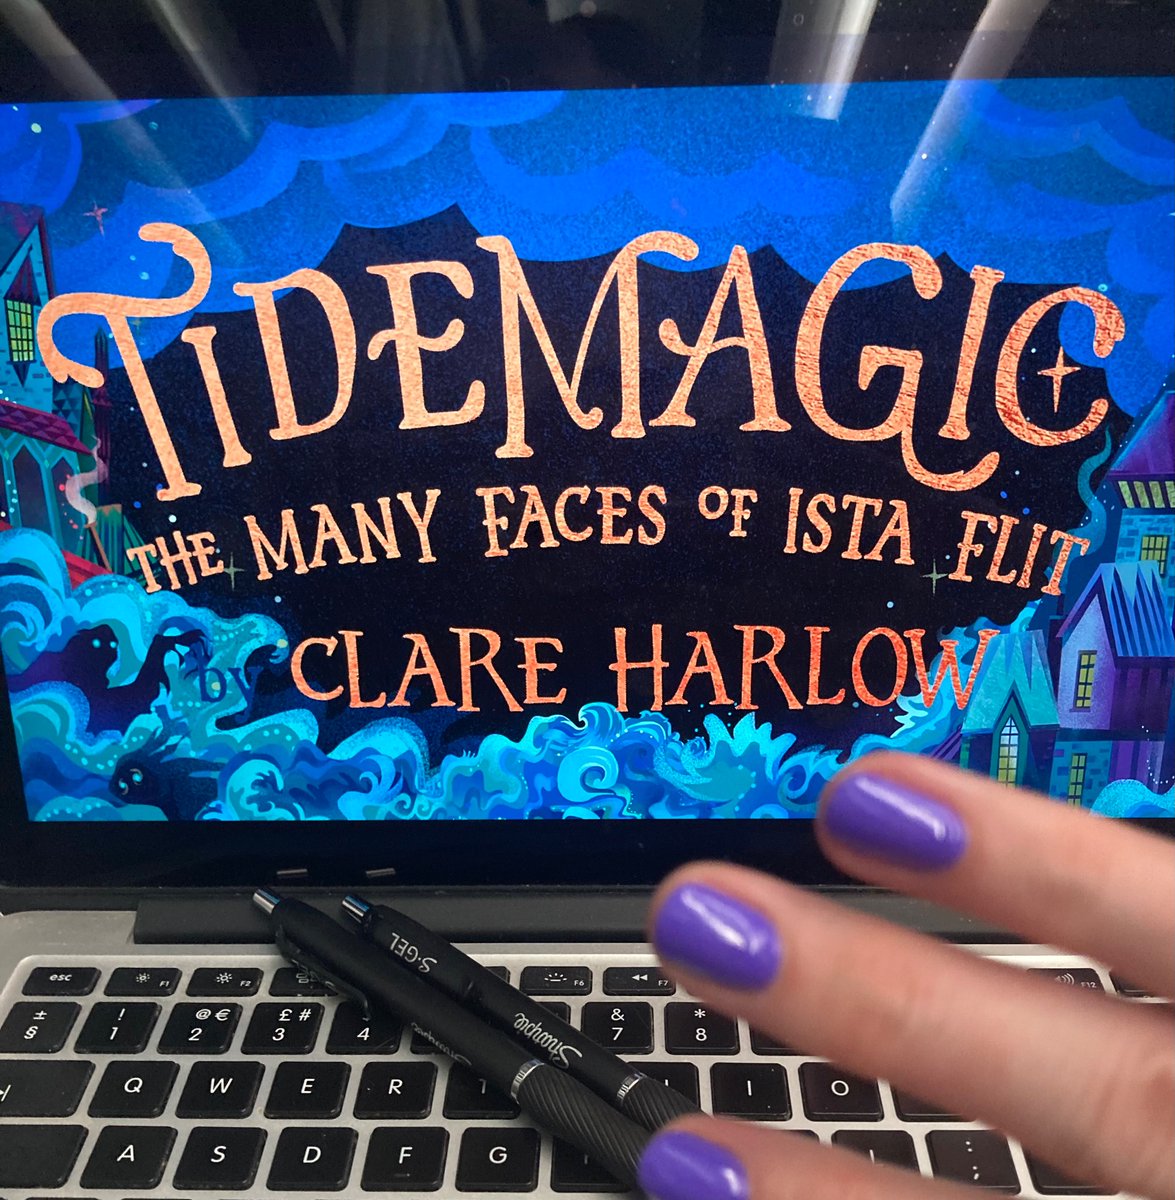 Slides: ready. Sharpies: ready. Nails: purple. East Midlands here I come!

‘What’s that?’ you say. ‘Sharpies? Will you be signing books?’

Why yes, I will, and if you would like a signed, dedicated copy of Tidemagic, contact @Wonder_Bookshop today and they can sort it out 😊